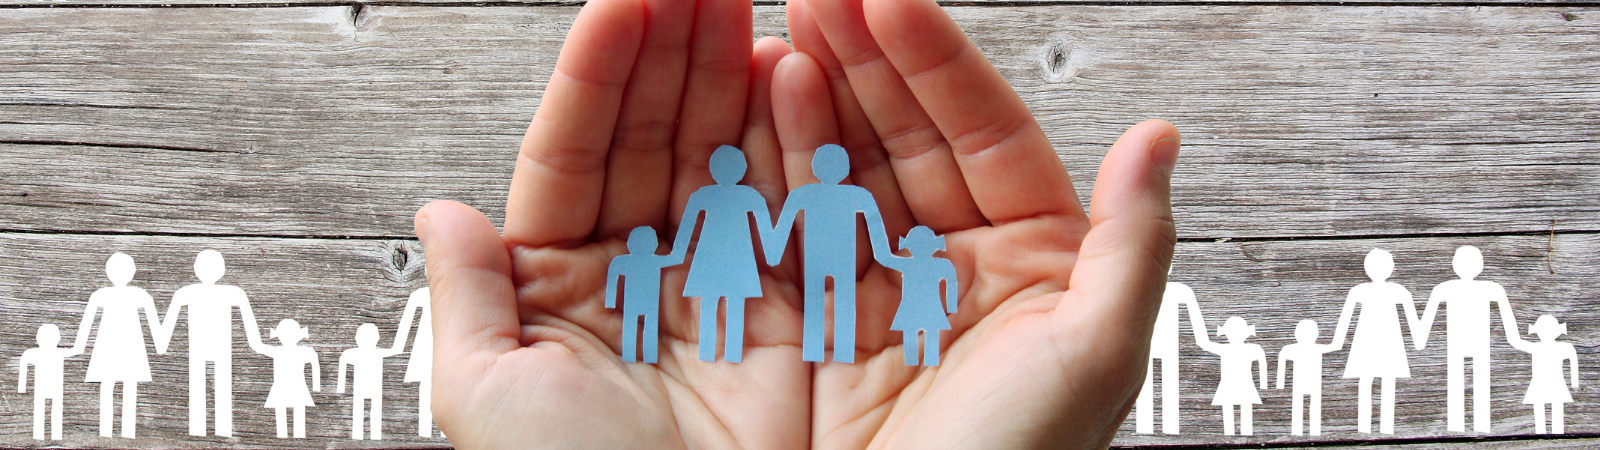 family hands banner image